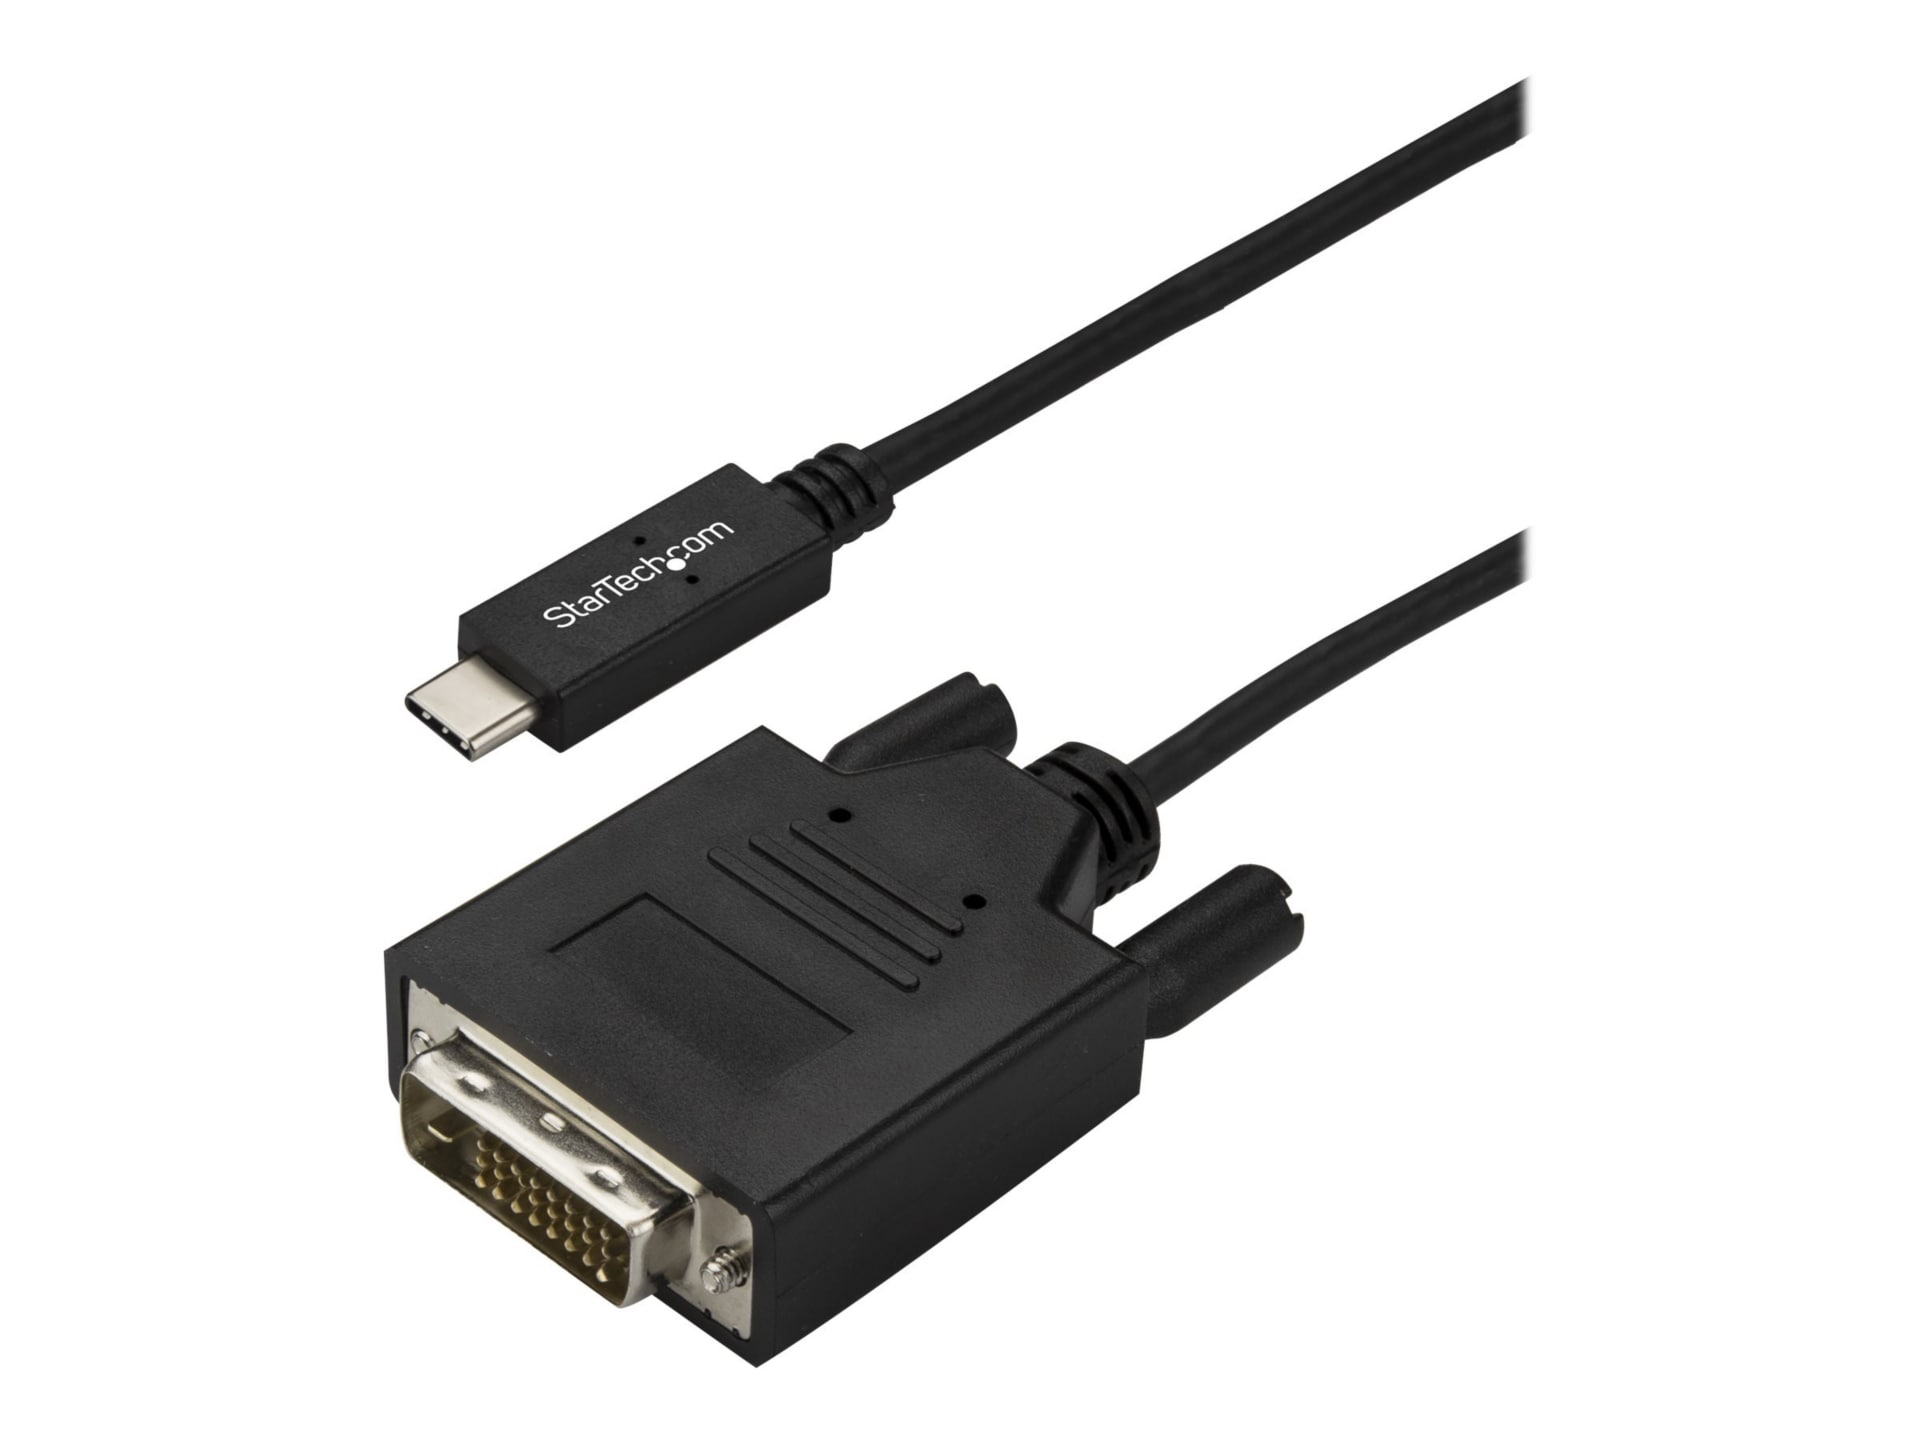 StarTech.com 10ft USB C to Cable - 1080p USB Type C to DVI-Digital Video Display - CDP2DVI3MBNL - Monitor Cables & Adapters - CDW.com